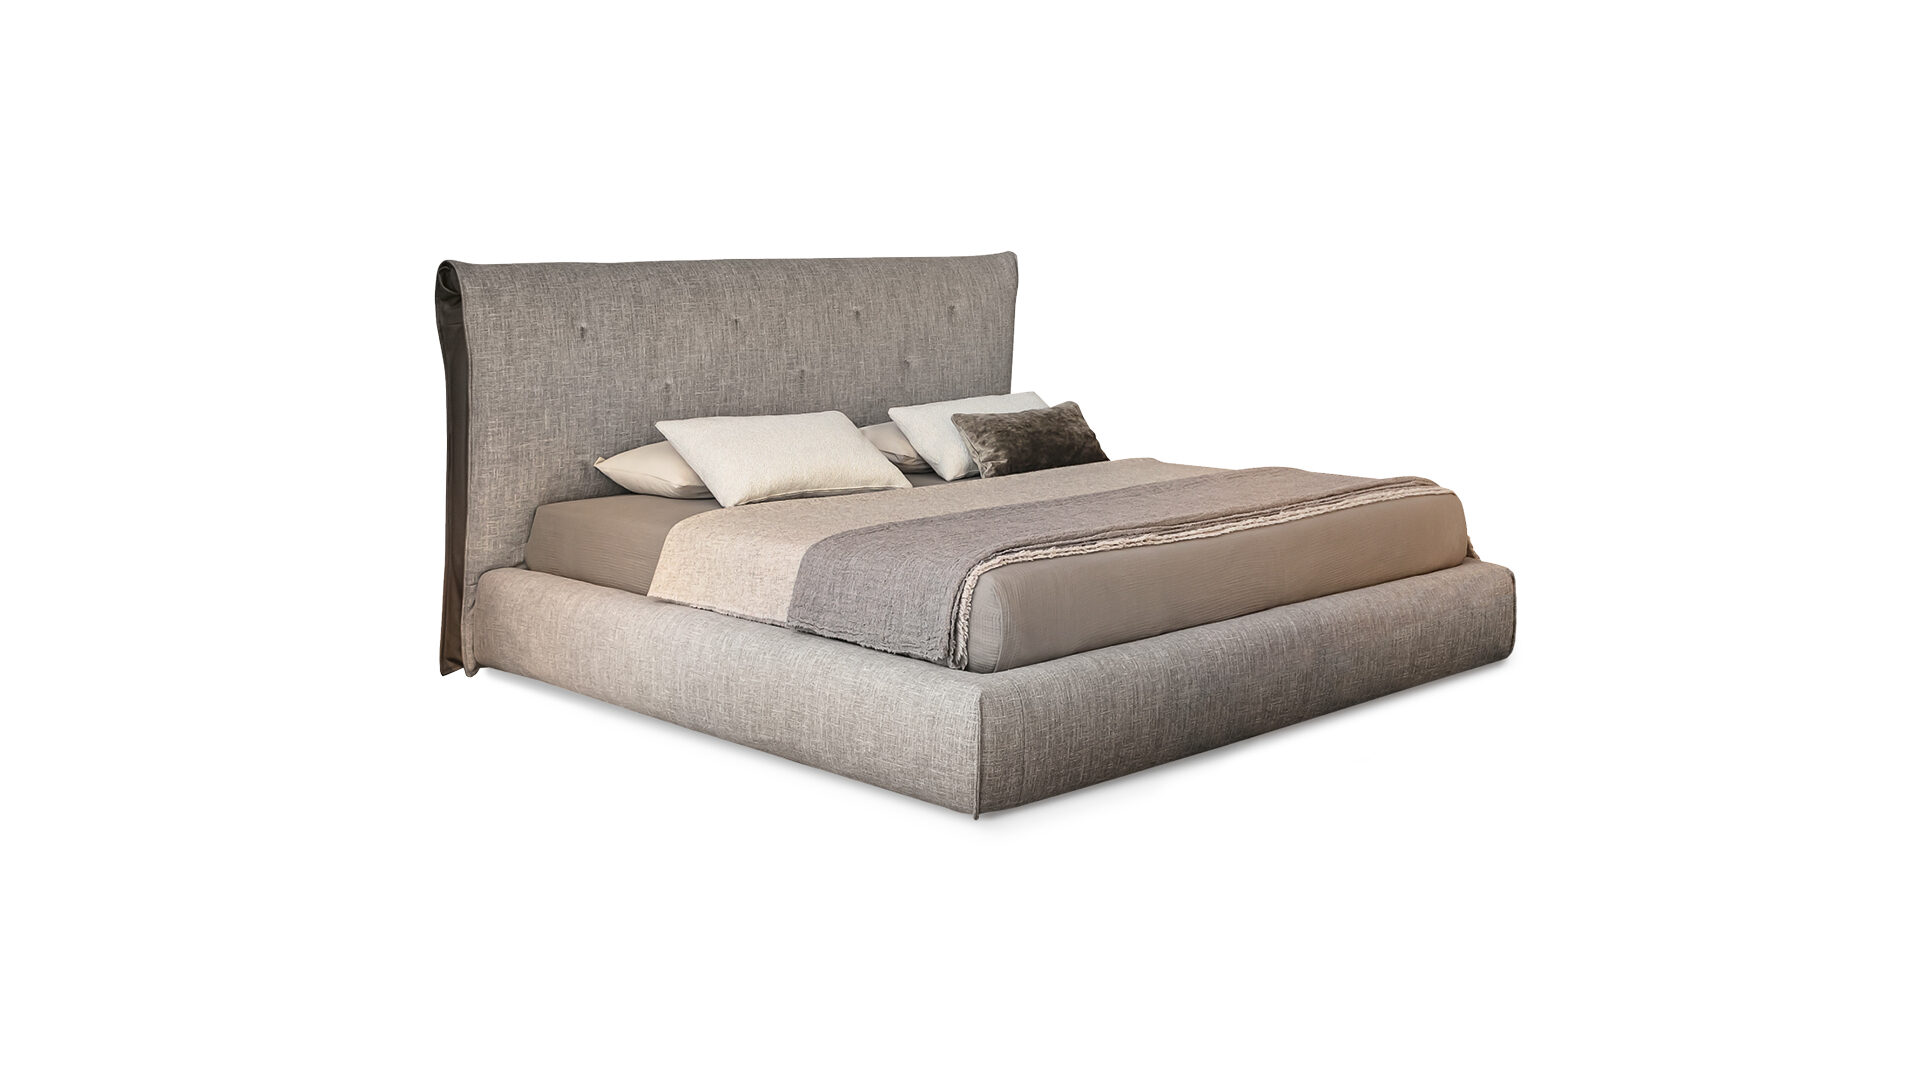 saddle-bed-plus-png